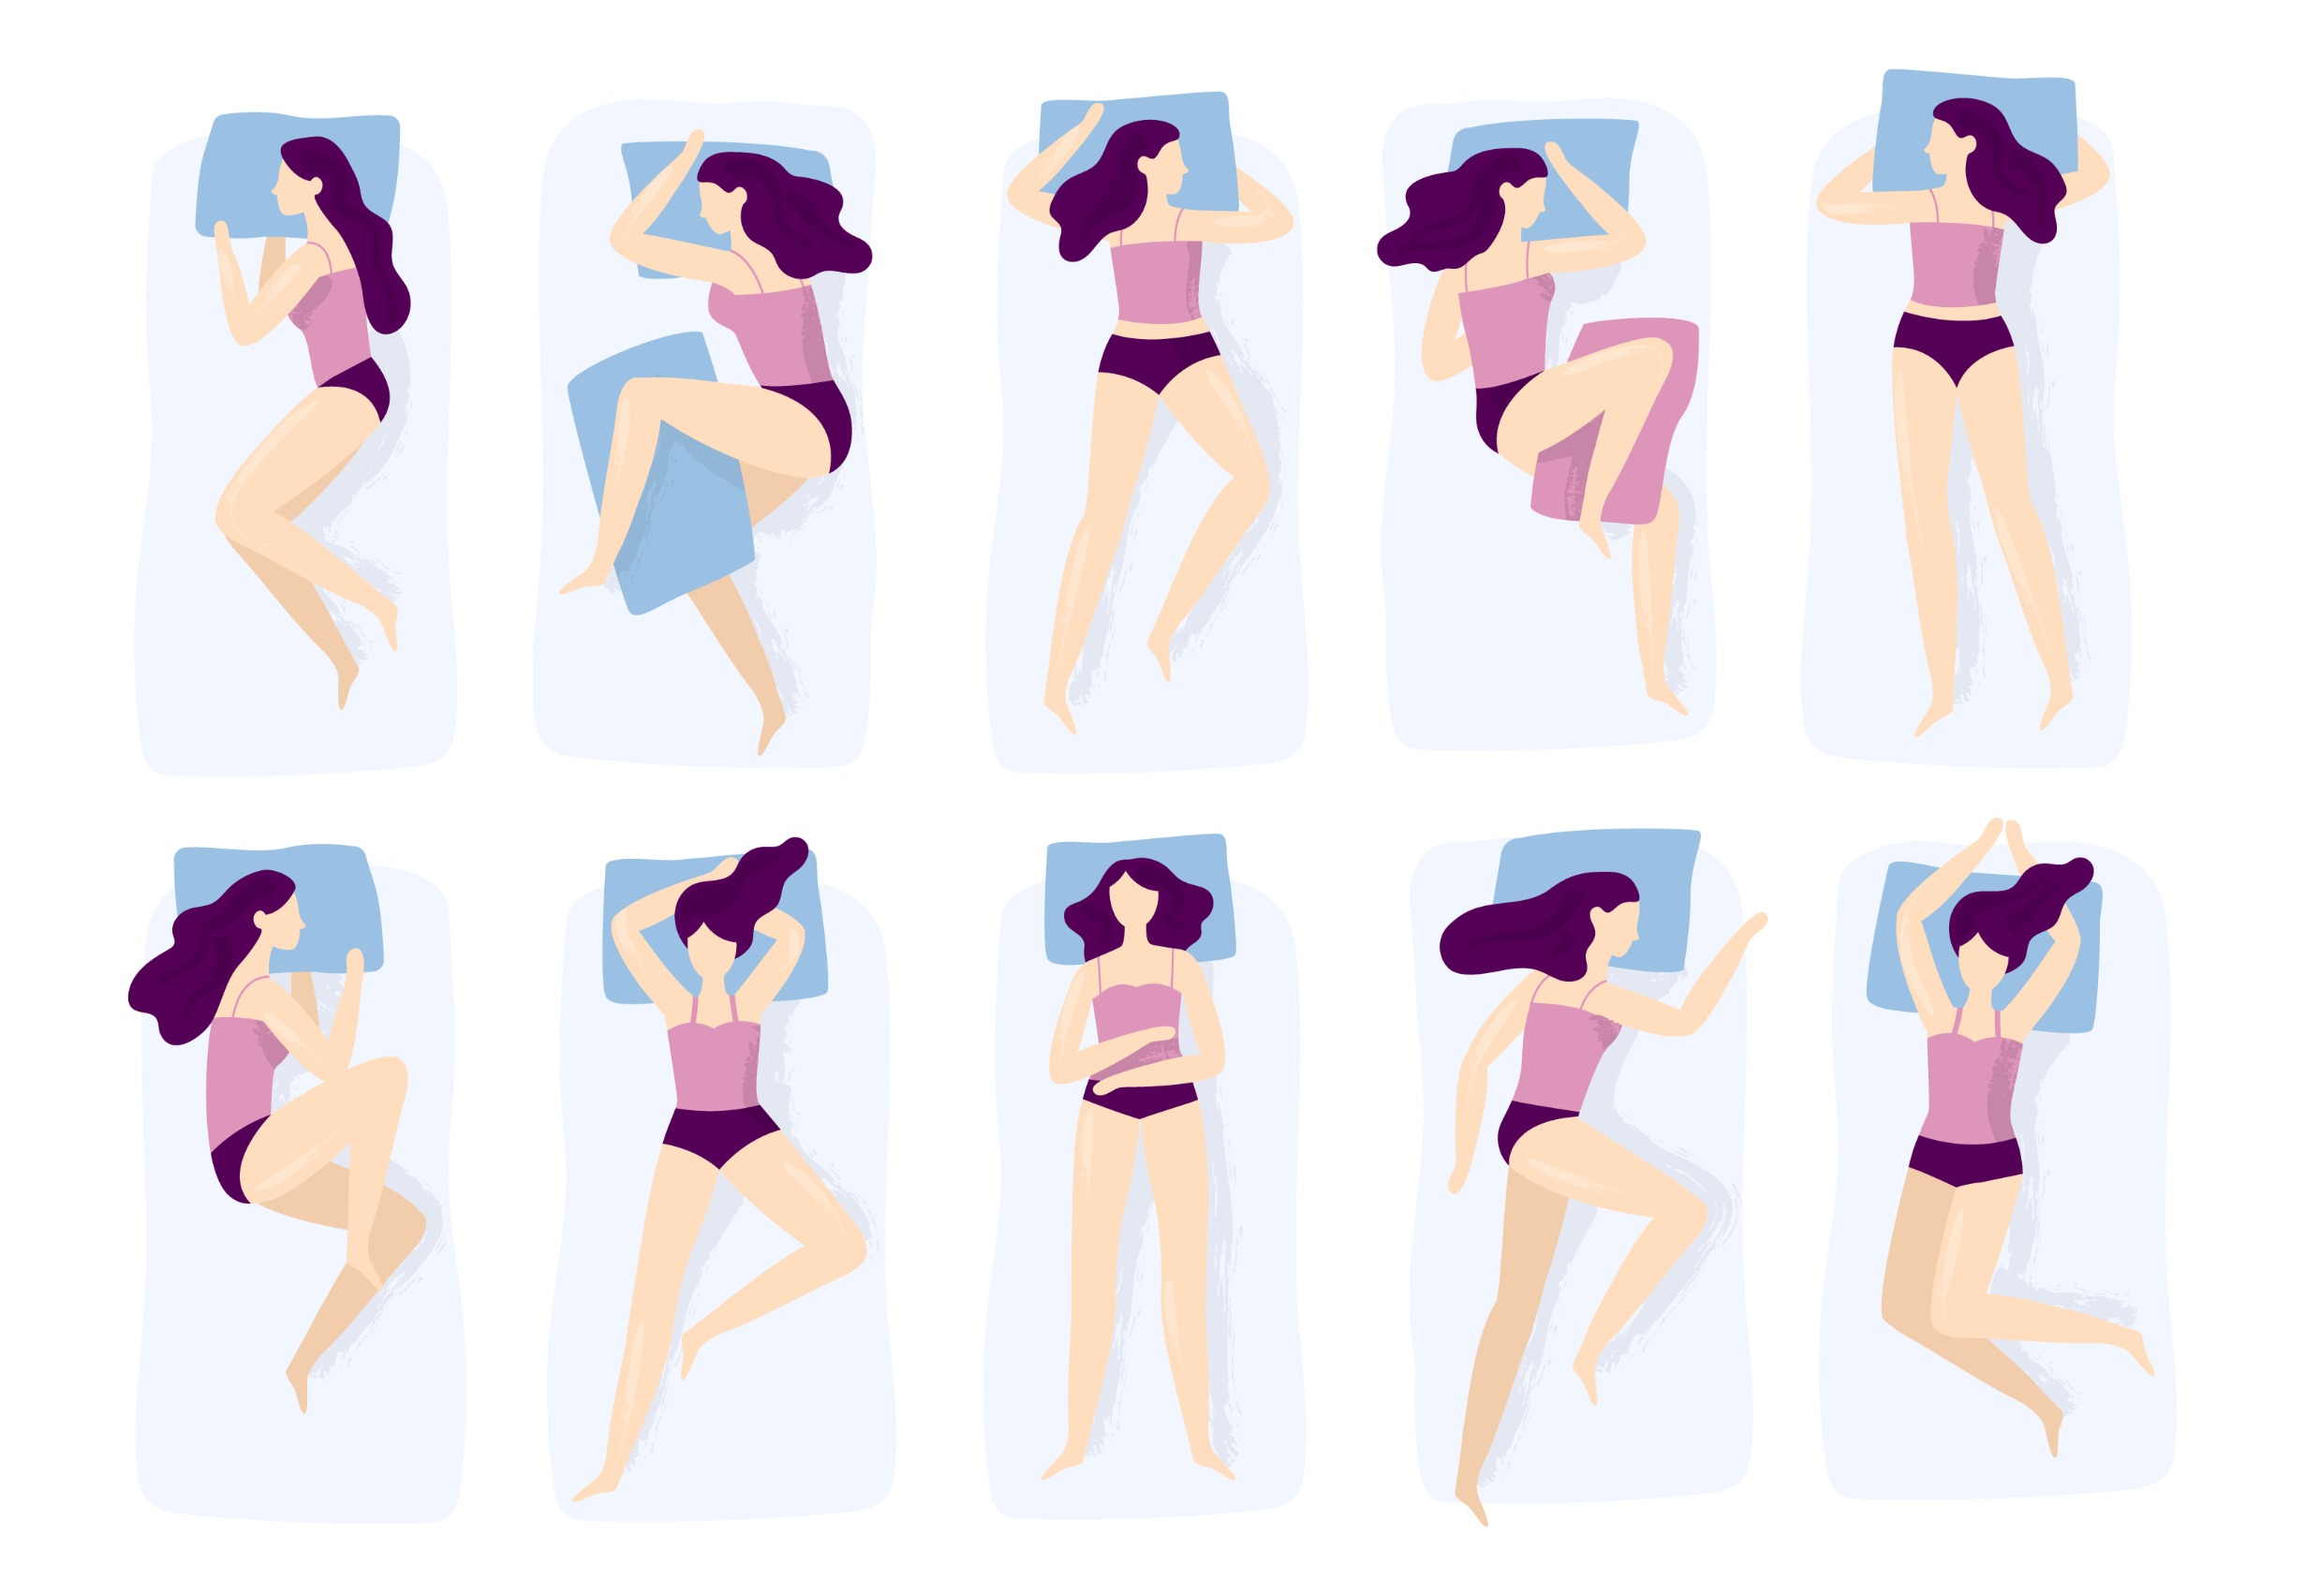 Sleeping Positions to Help With Low Back Pain